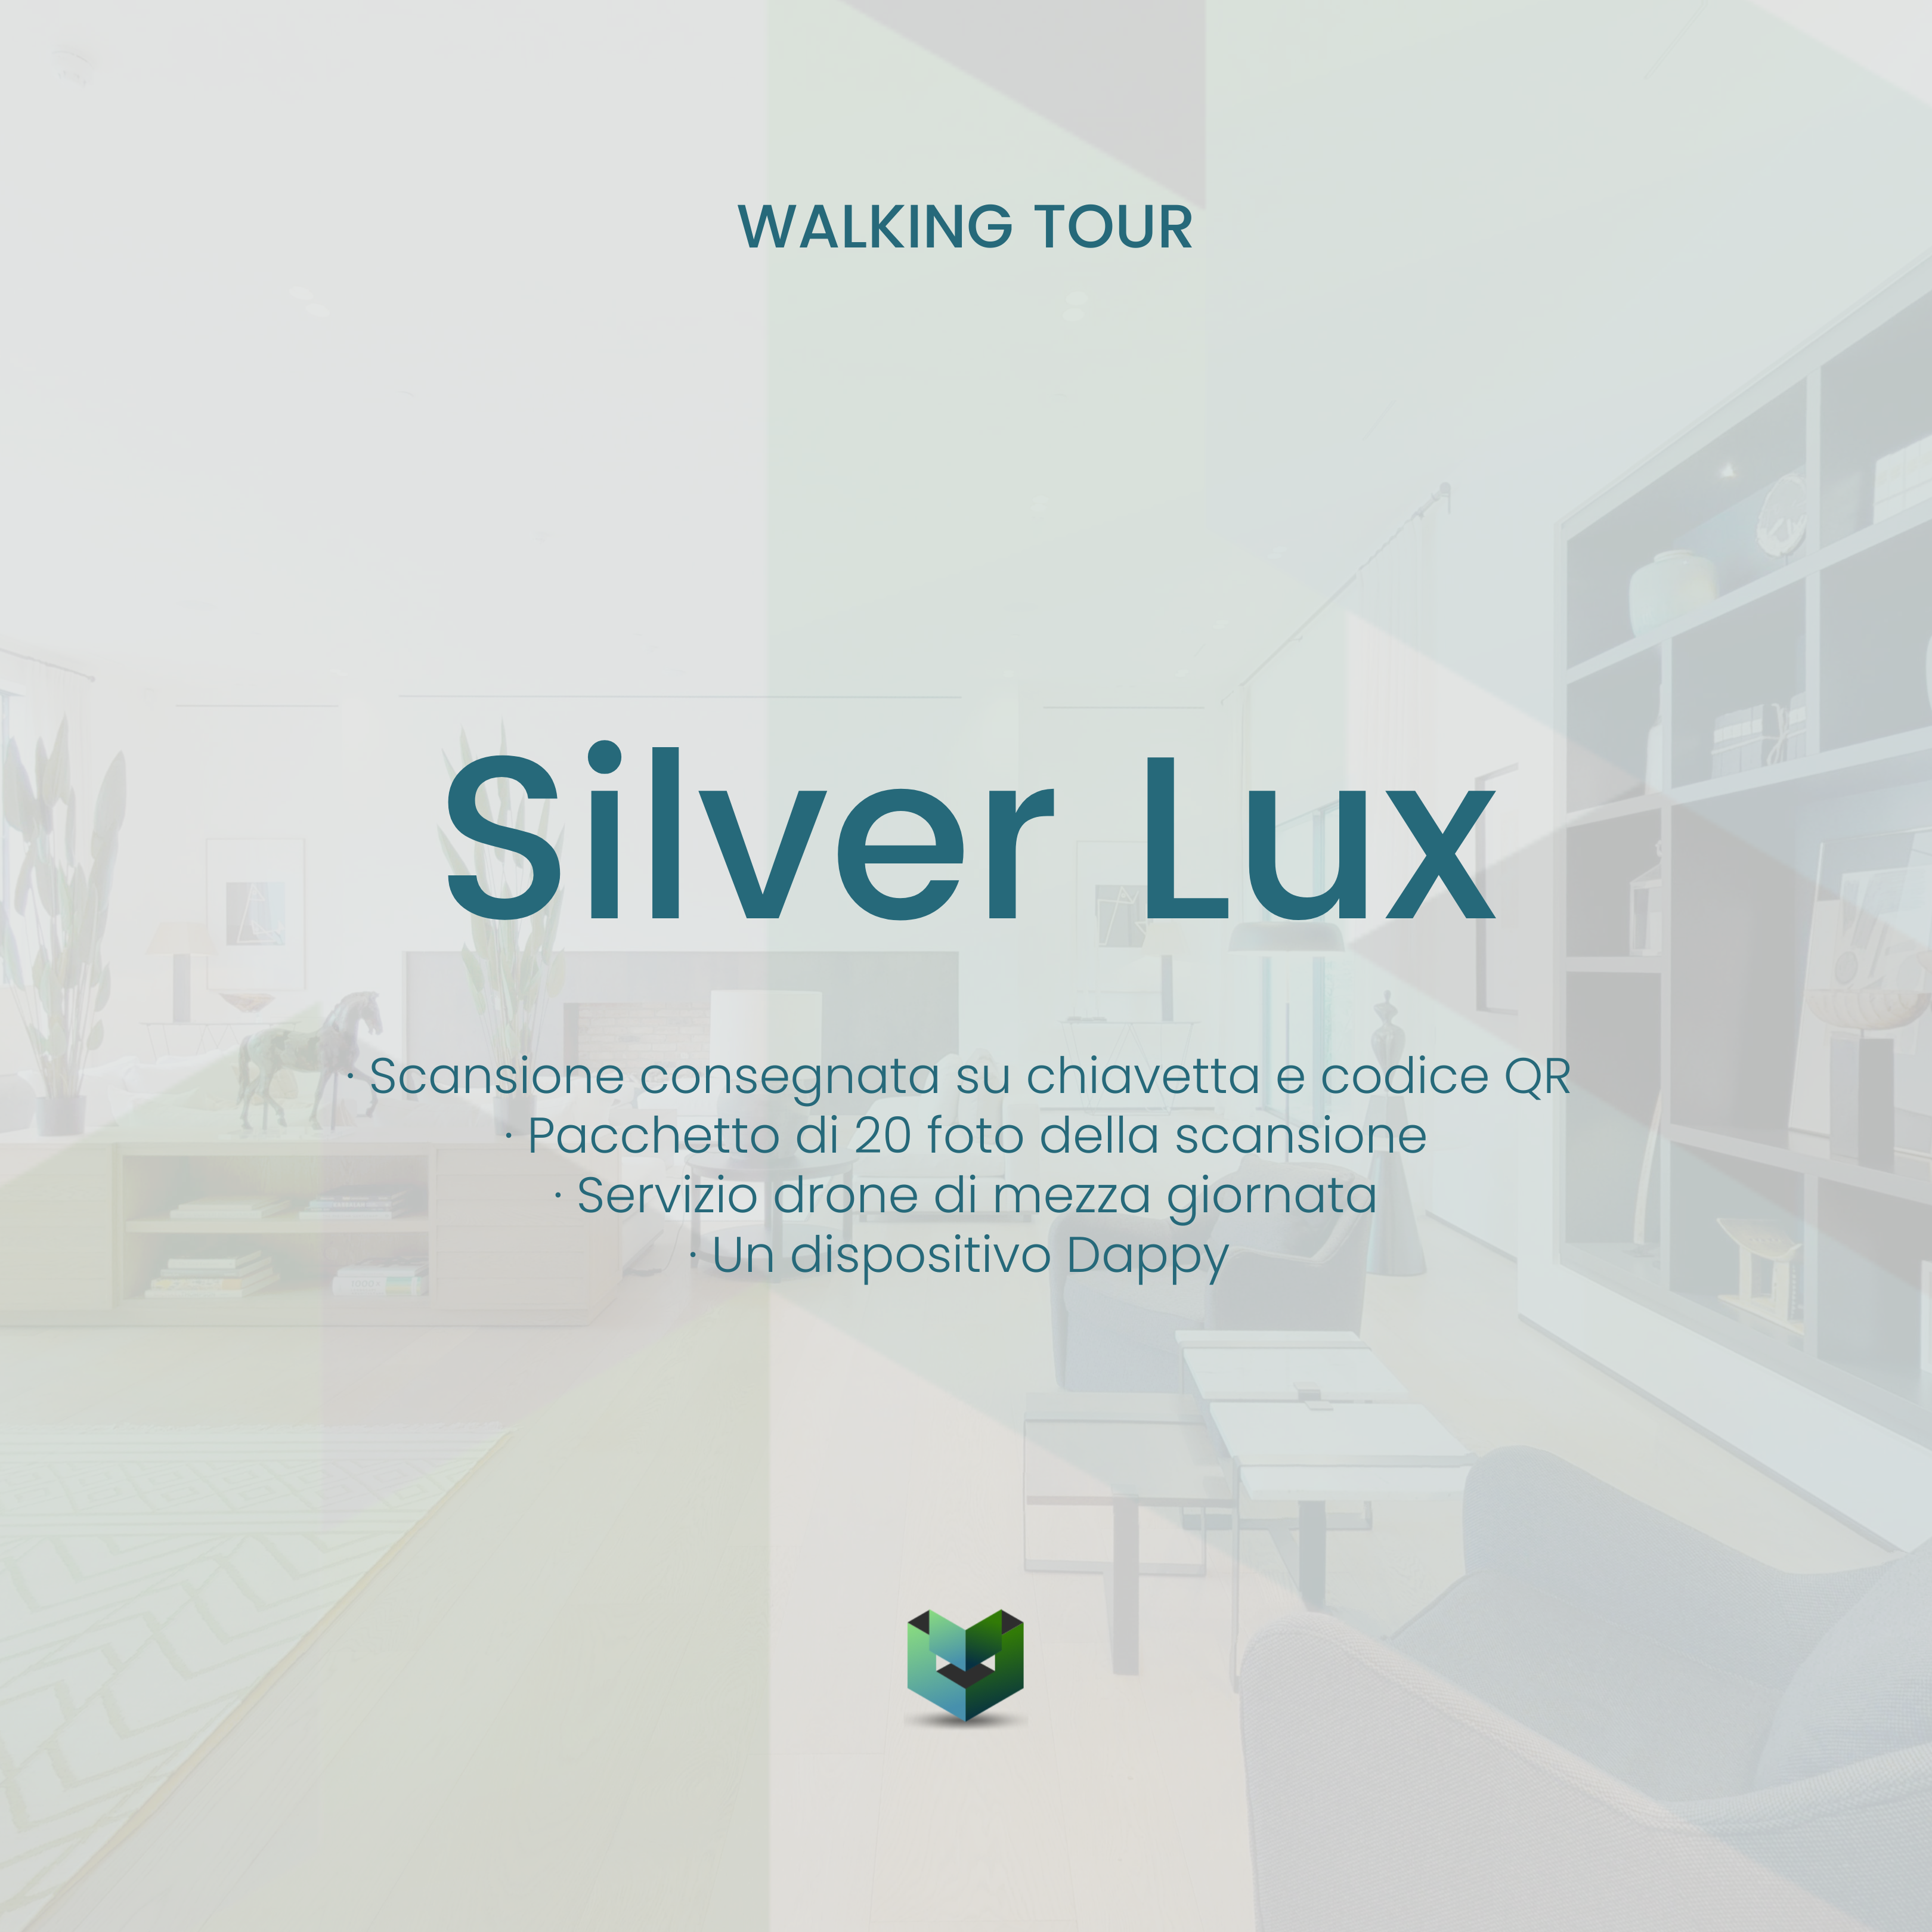 SILVER LUX